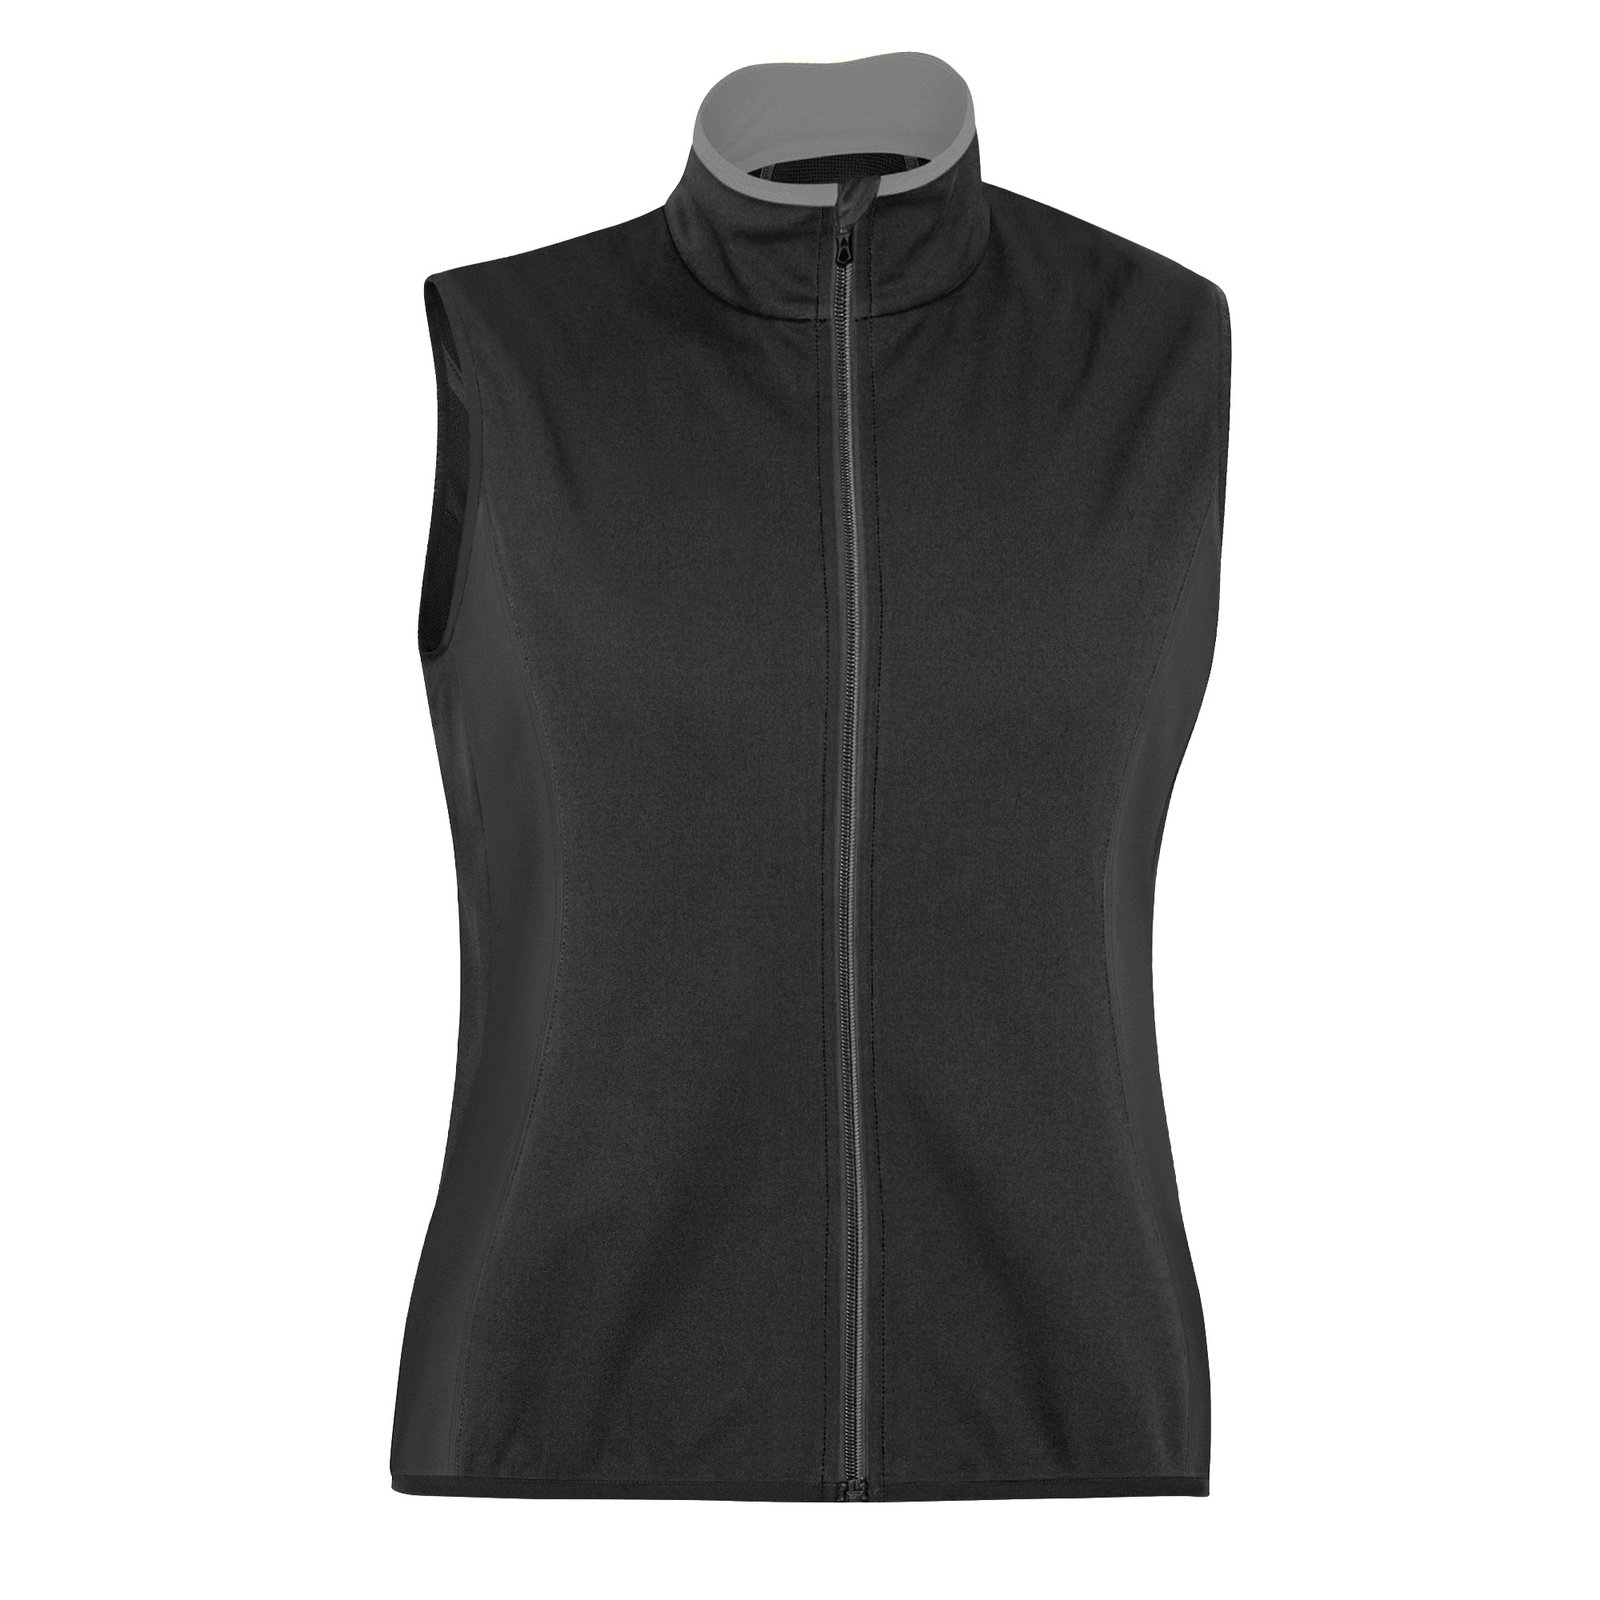 sports zipped vest isolated over white